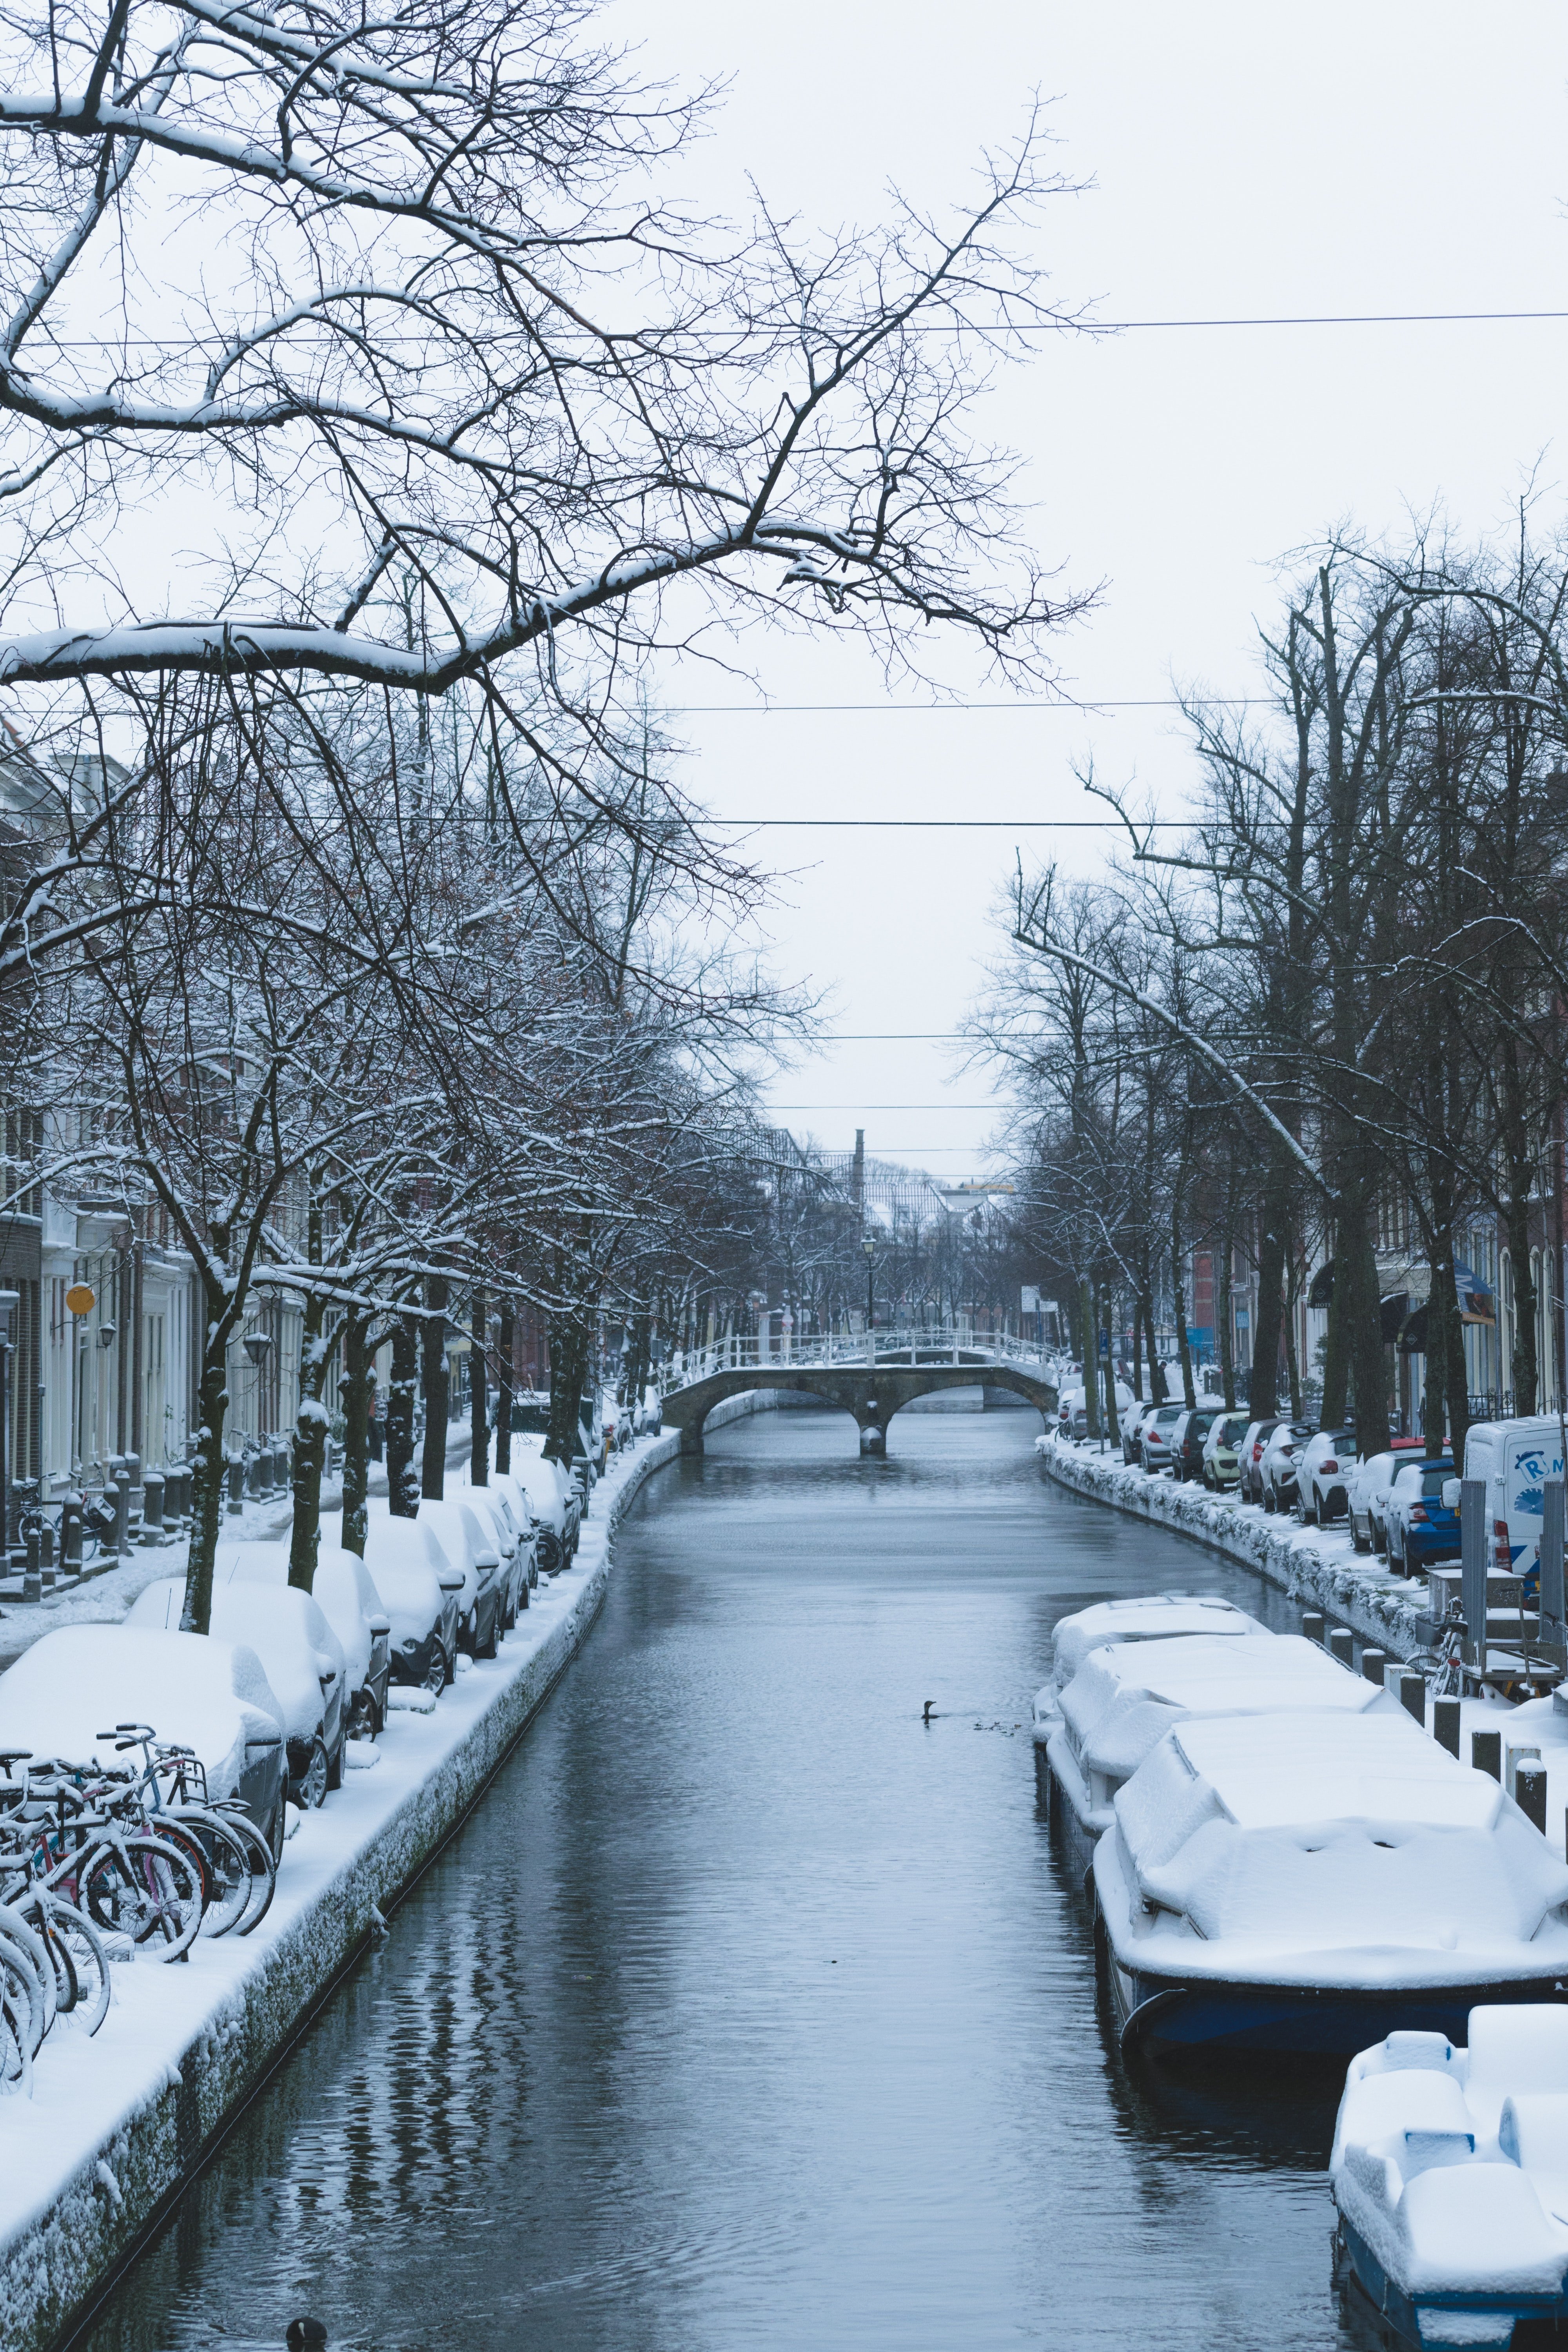 Snowy canal in the Netherlands